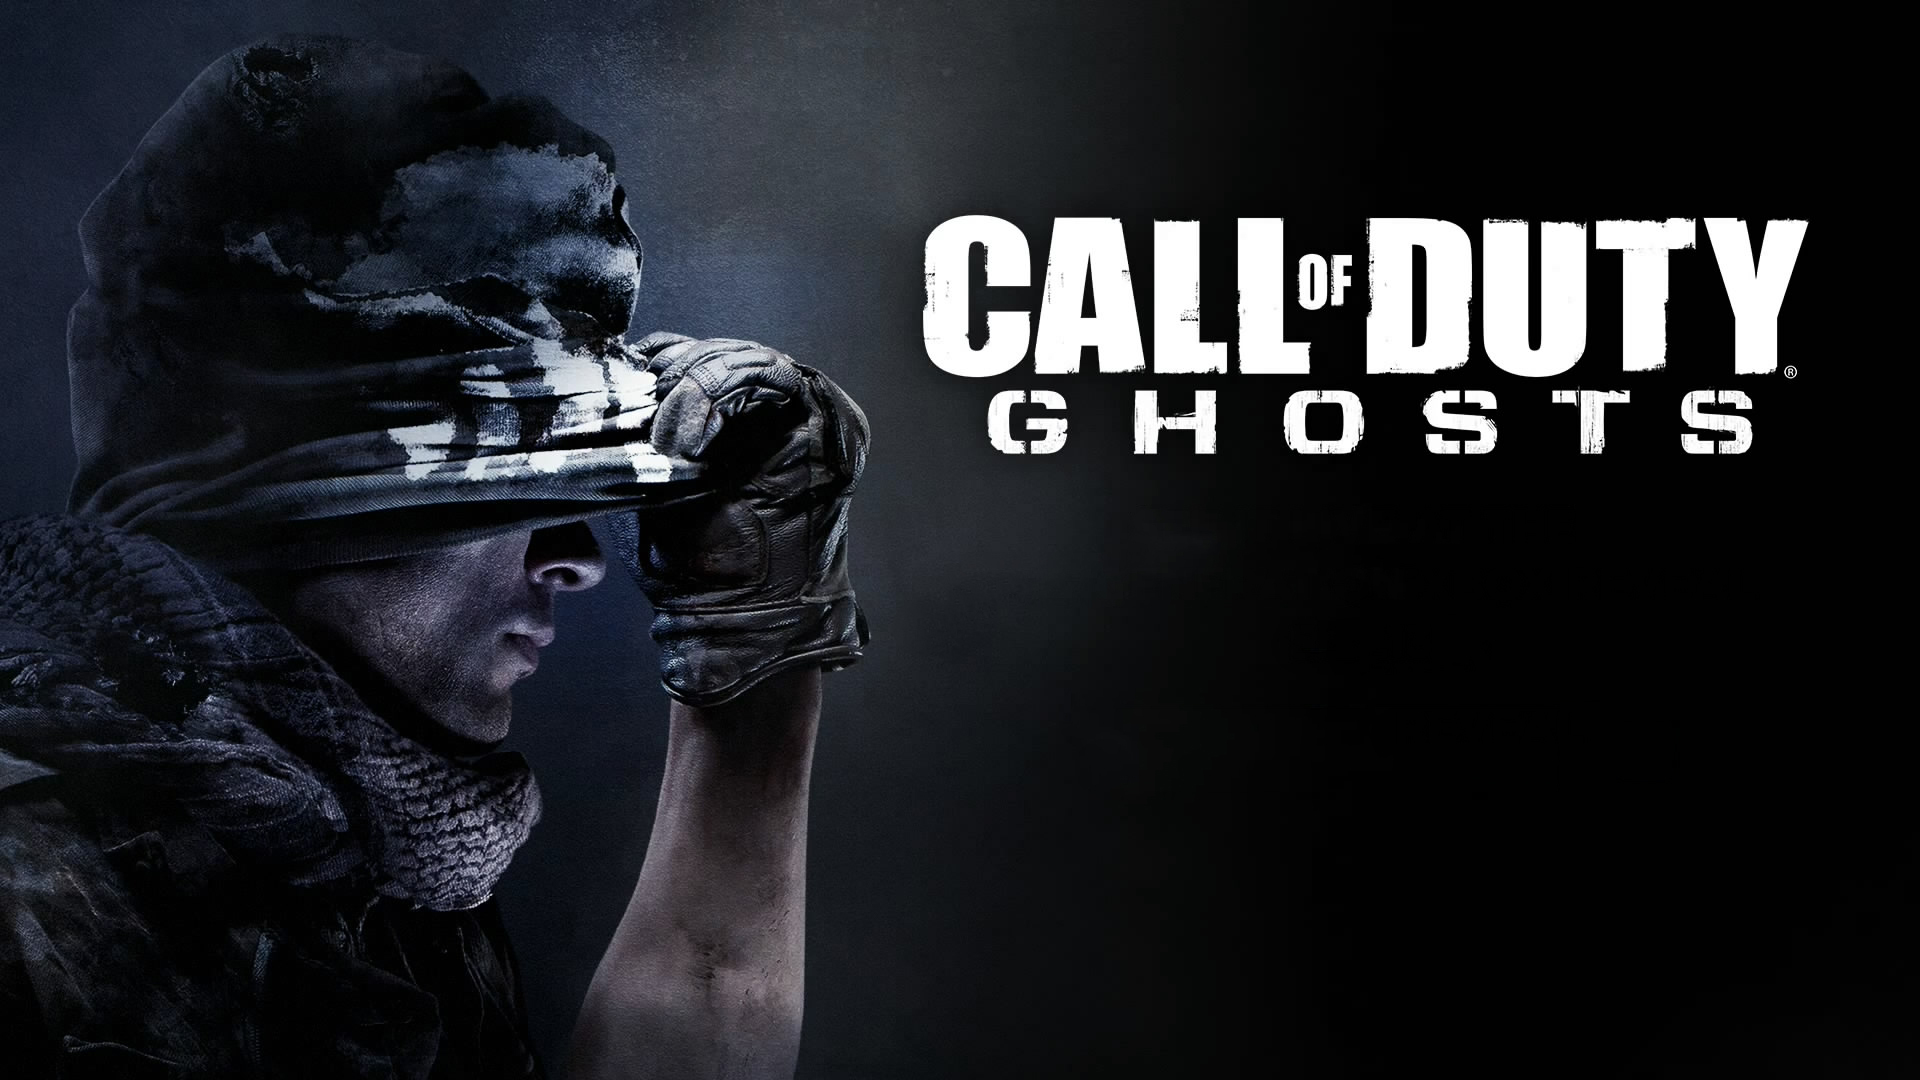 Call of Duty Ghosts Wallpapers HD Wallpapers 1920x1080